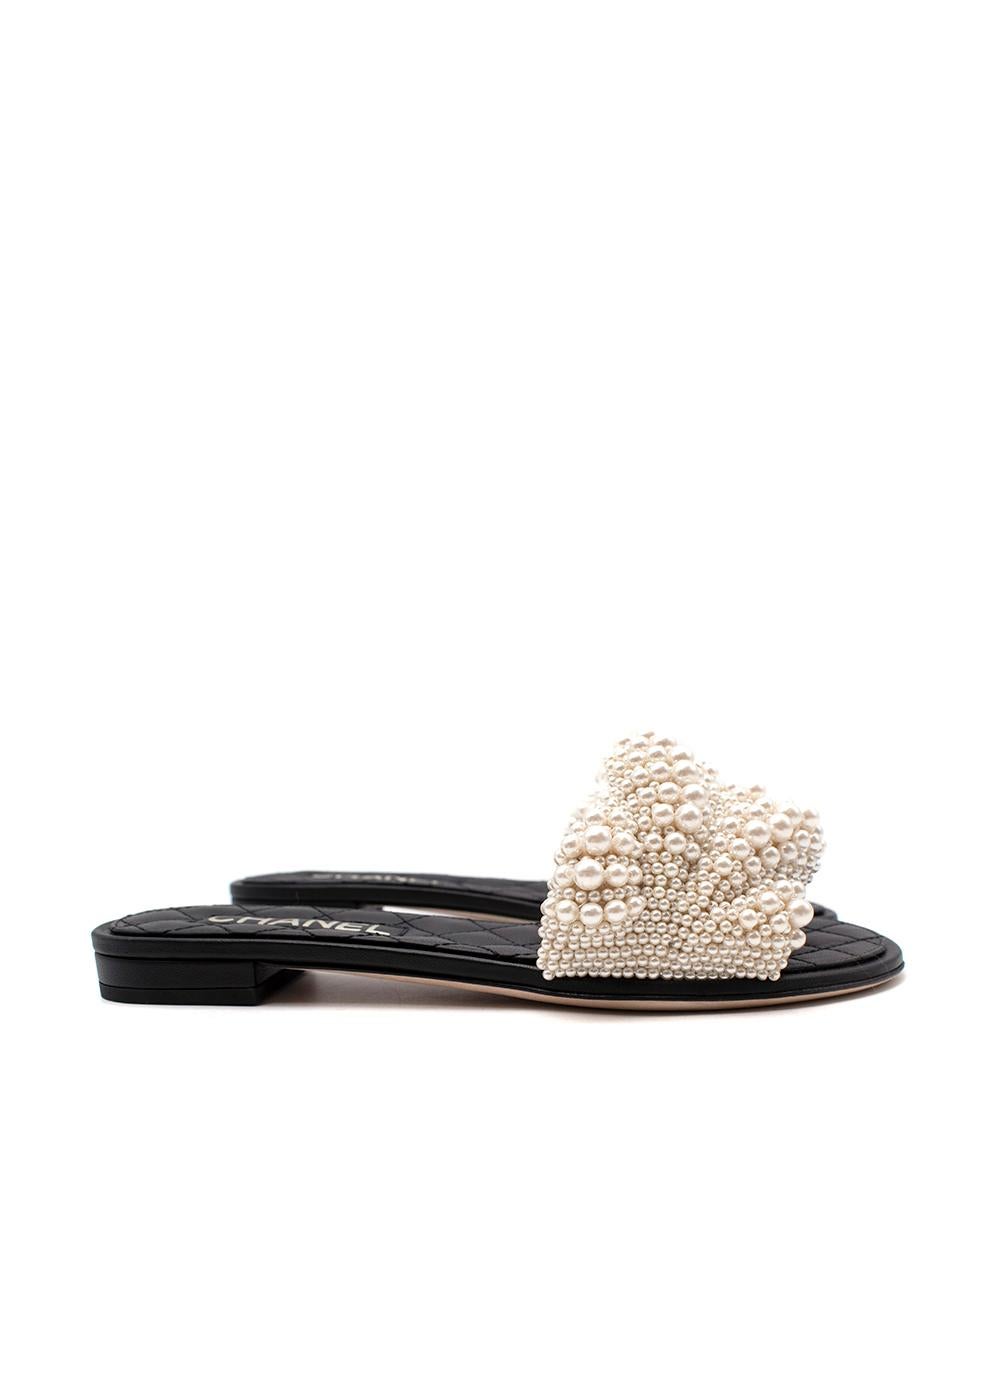 Chanel Faux-Pearl Embellished Sliders

- Chunky braided ropes of ivory faux-pearls adorn a single foot strap
- Black quilted leather footbed
- CC logo on the heel

Materials
Glass
Leather

Made In Italy

PLEASE NOTE, THESE ITEMS ARE PRE-OWNED AND